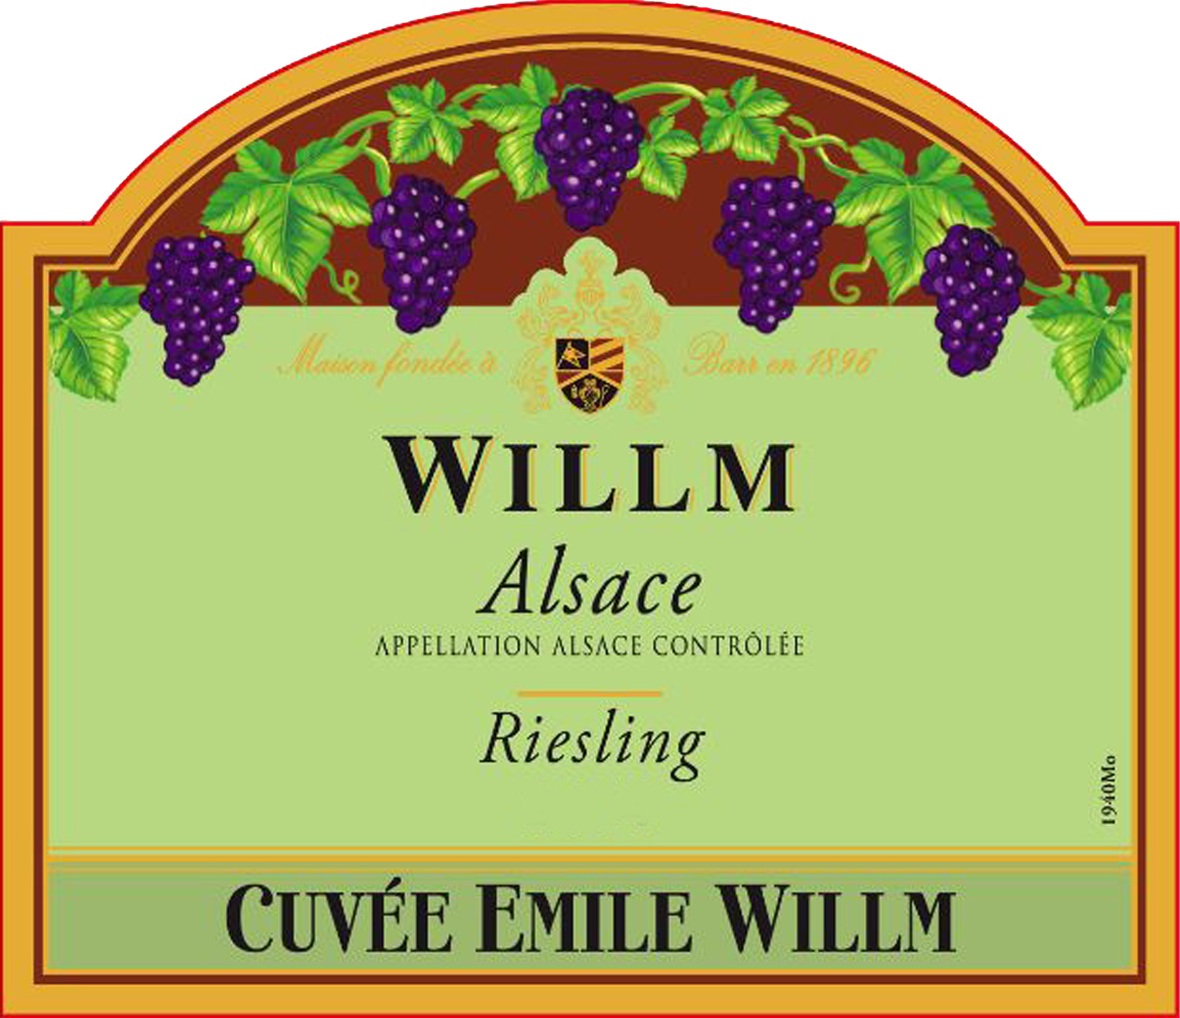 Alsace Willm - Cuvee Emile Willm - Riesling label